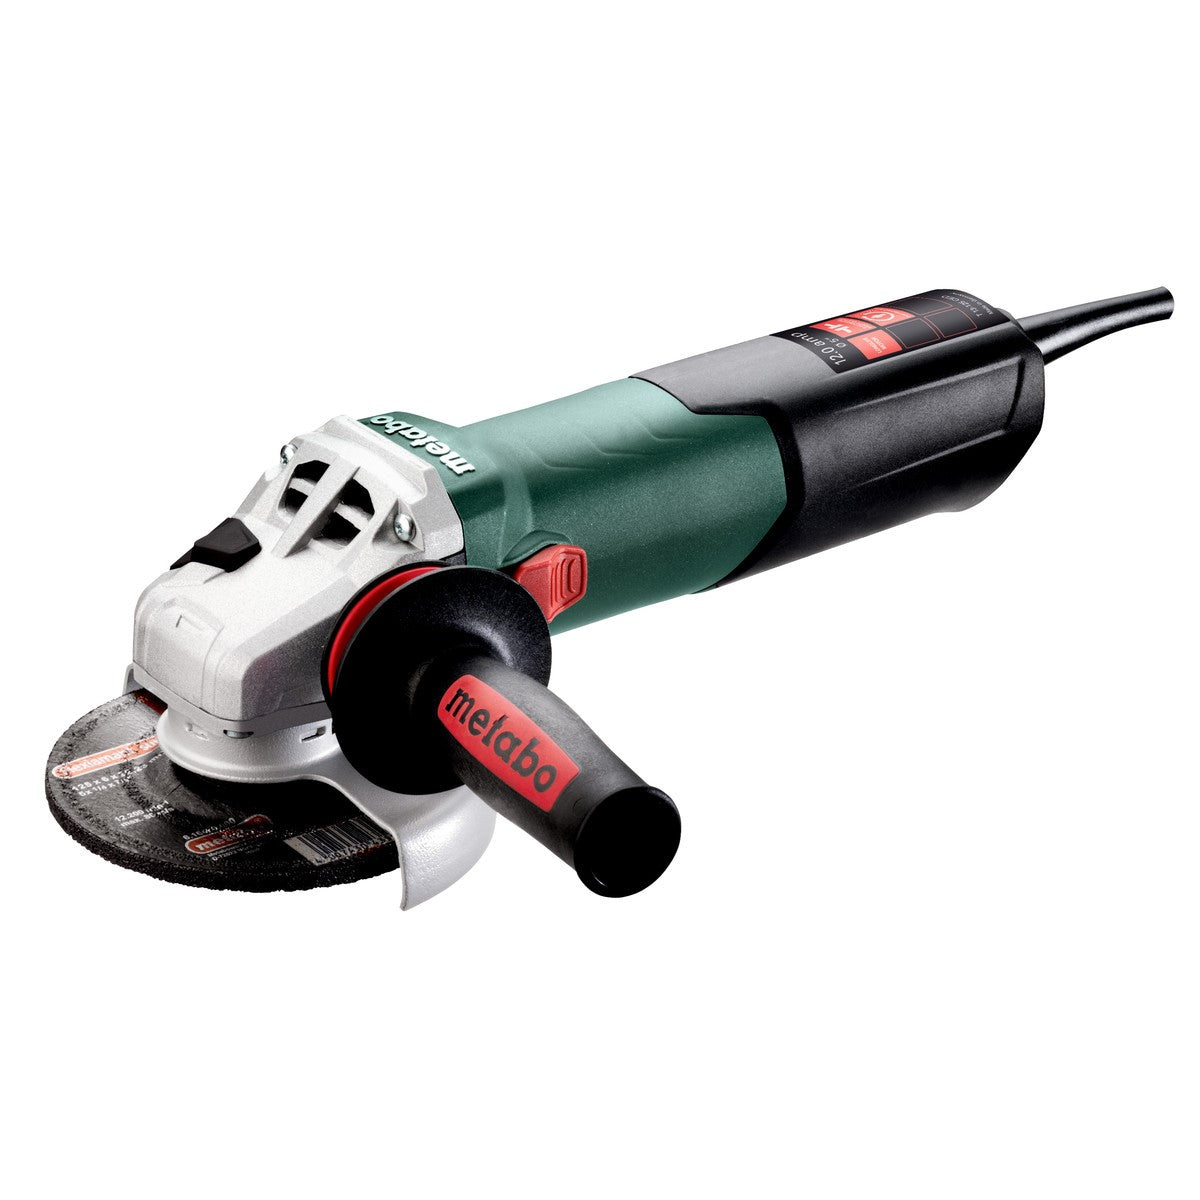 Metabo (600431420) 5 inch Compact Diamond Cutter